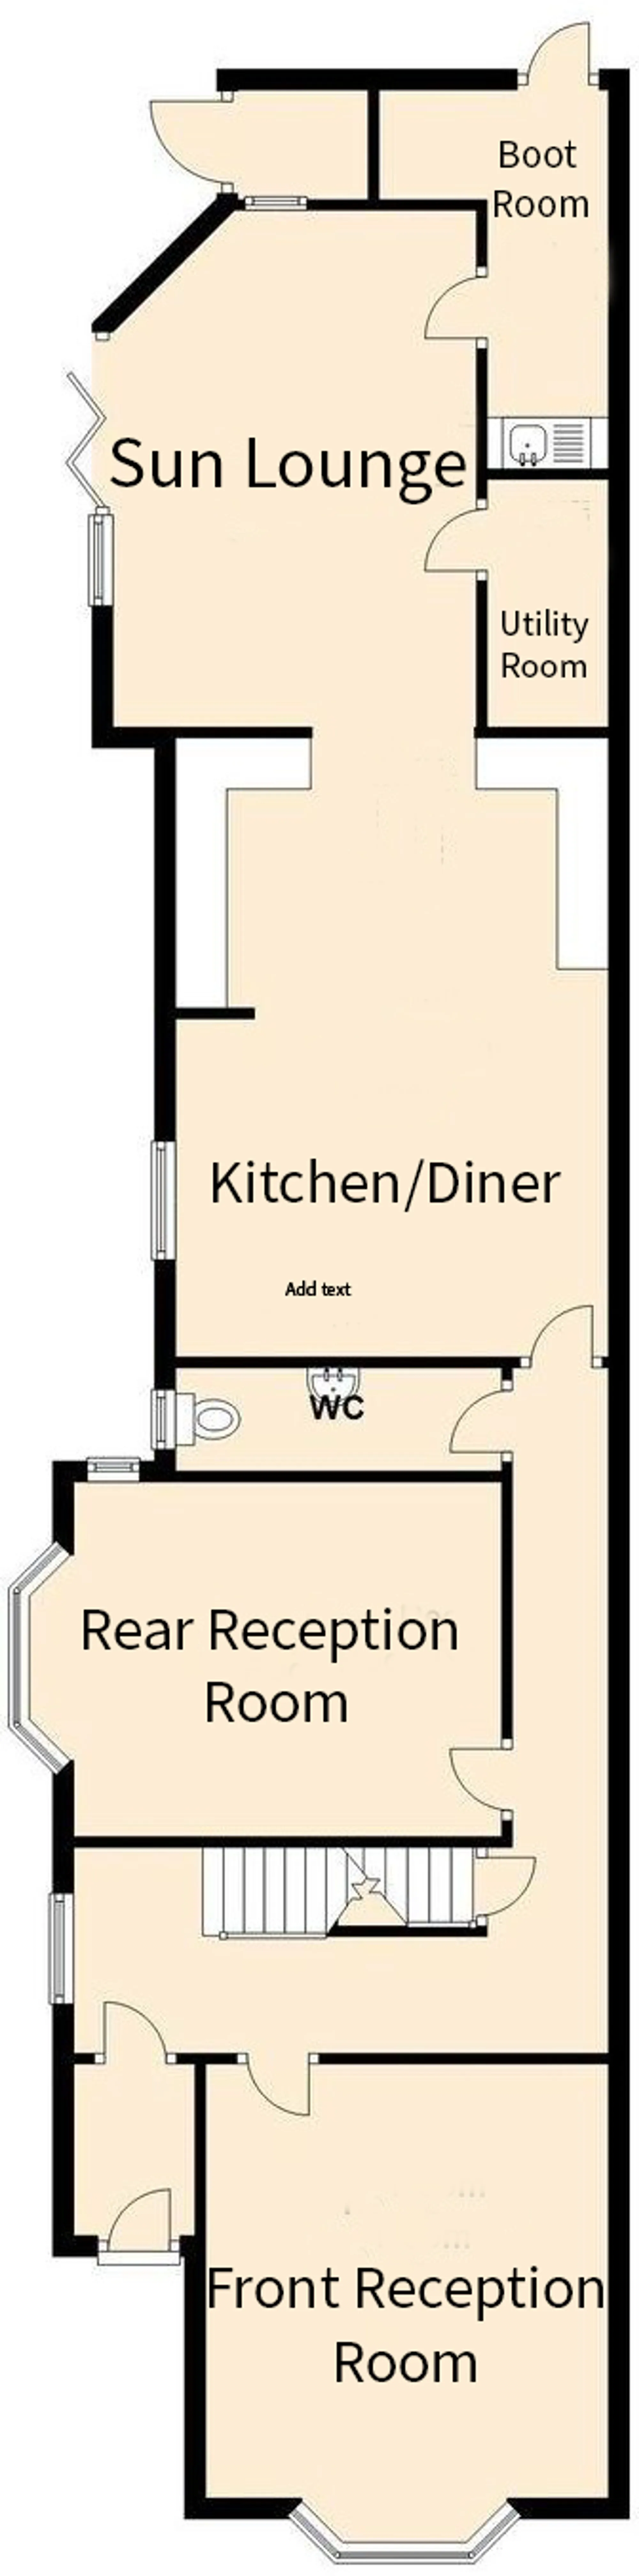 5 bed semi-detached villa for sale in Springfield Road, Leicester - Property floorplan